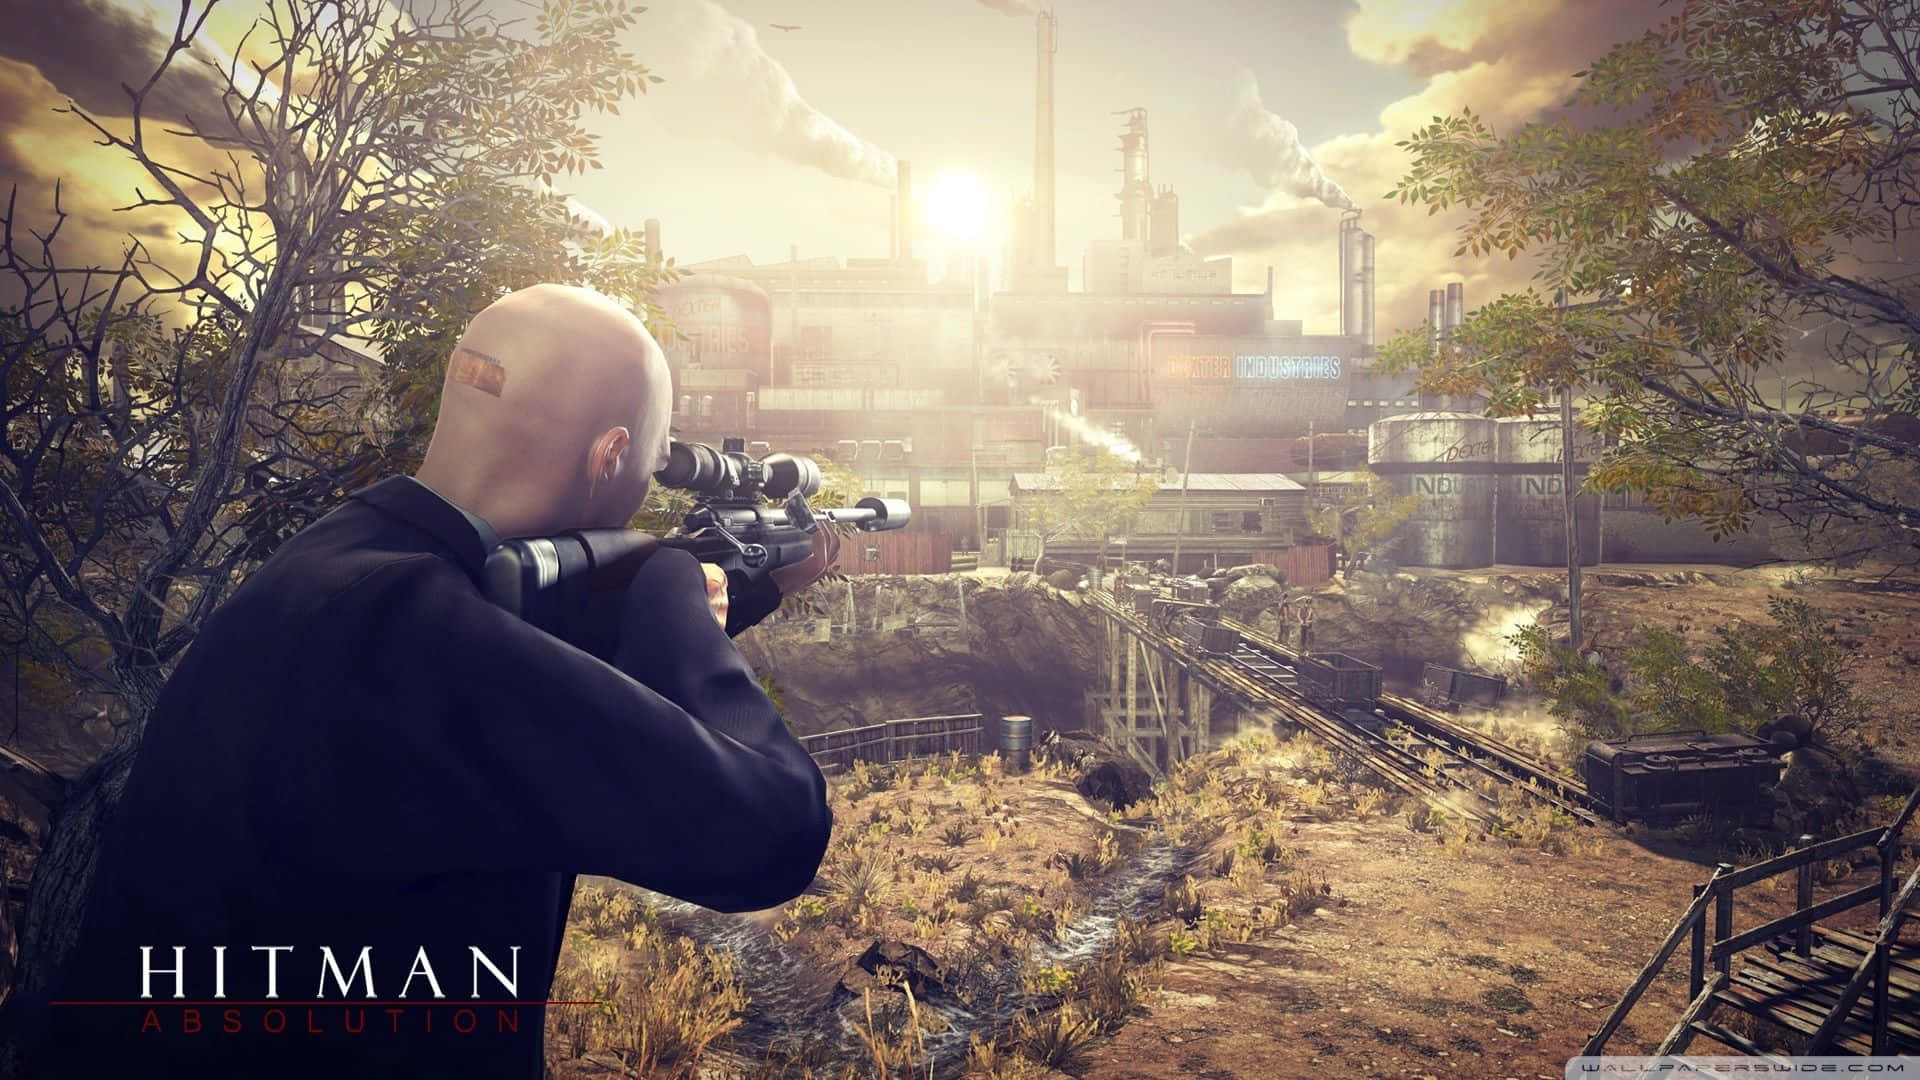 Agent 47 on the move in the videogame "Hitman Absolution".